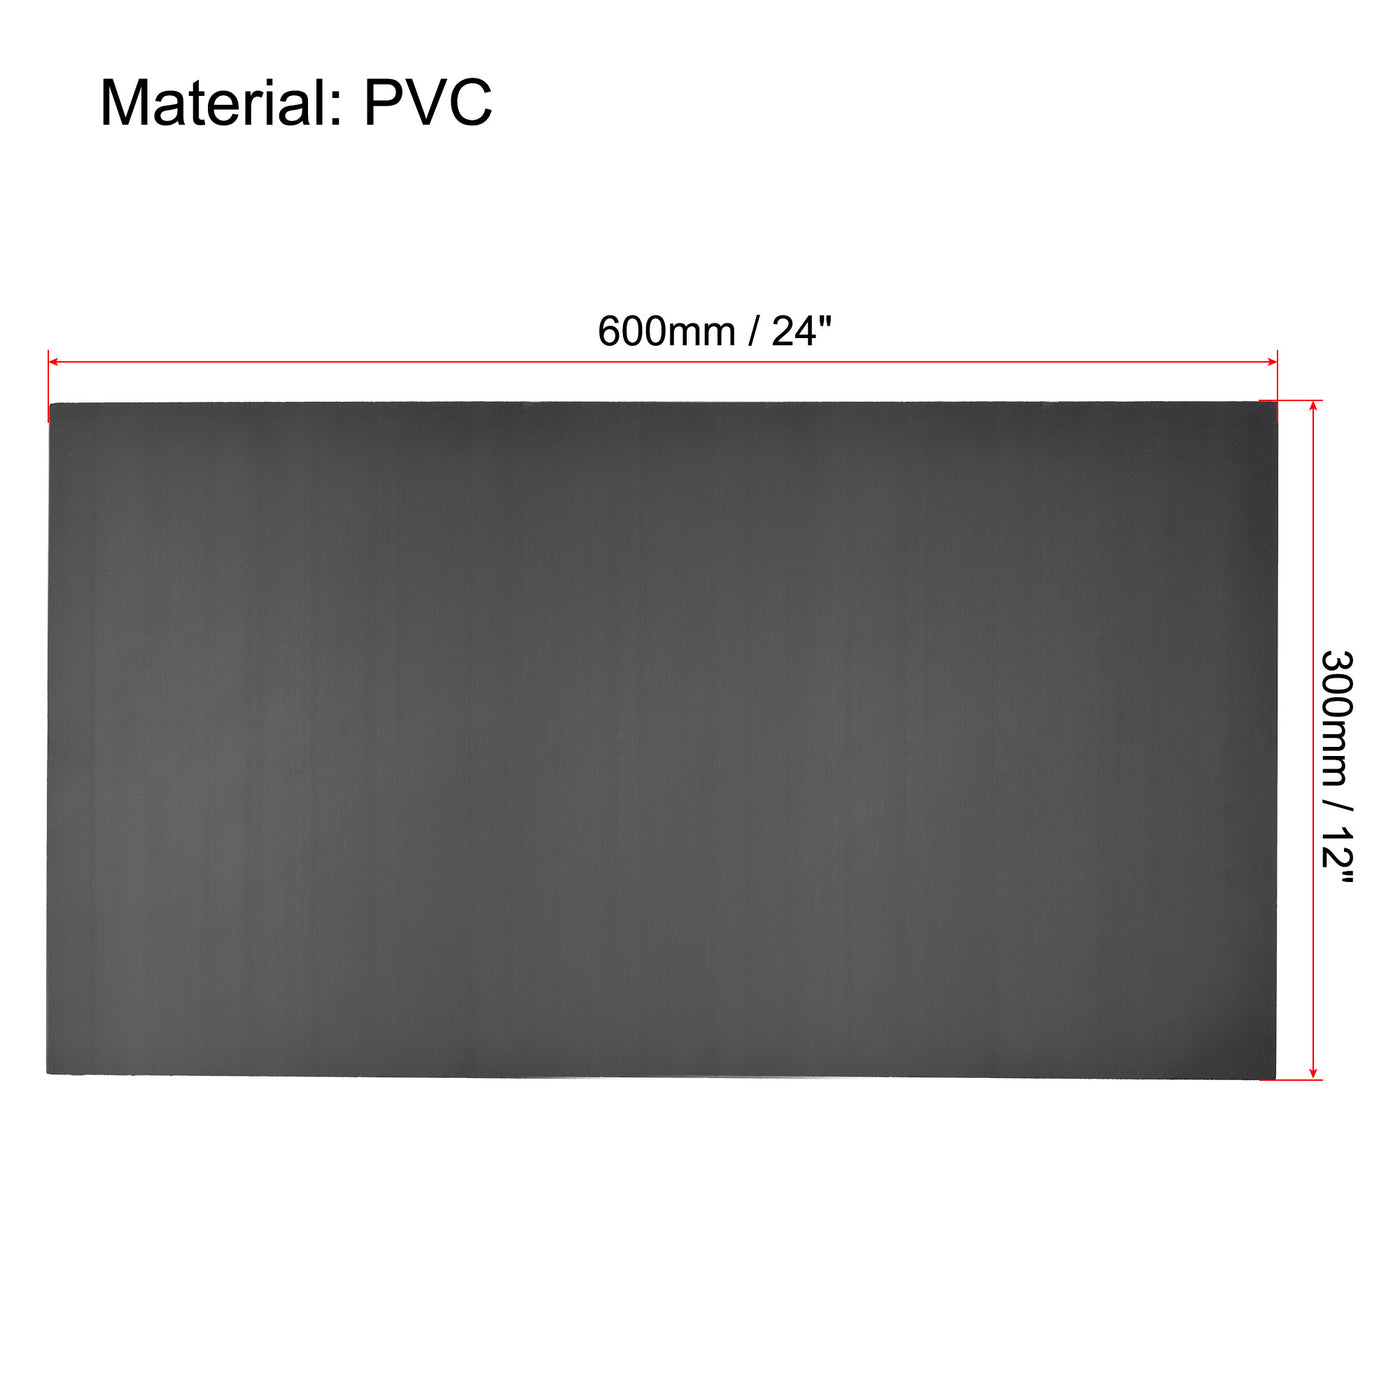 uxcell Uxcell PVC Foam Board Sheet,2.7mm x 300mm x 600mm,Black,Double Sided,Expanded PVC Sheet